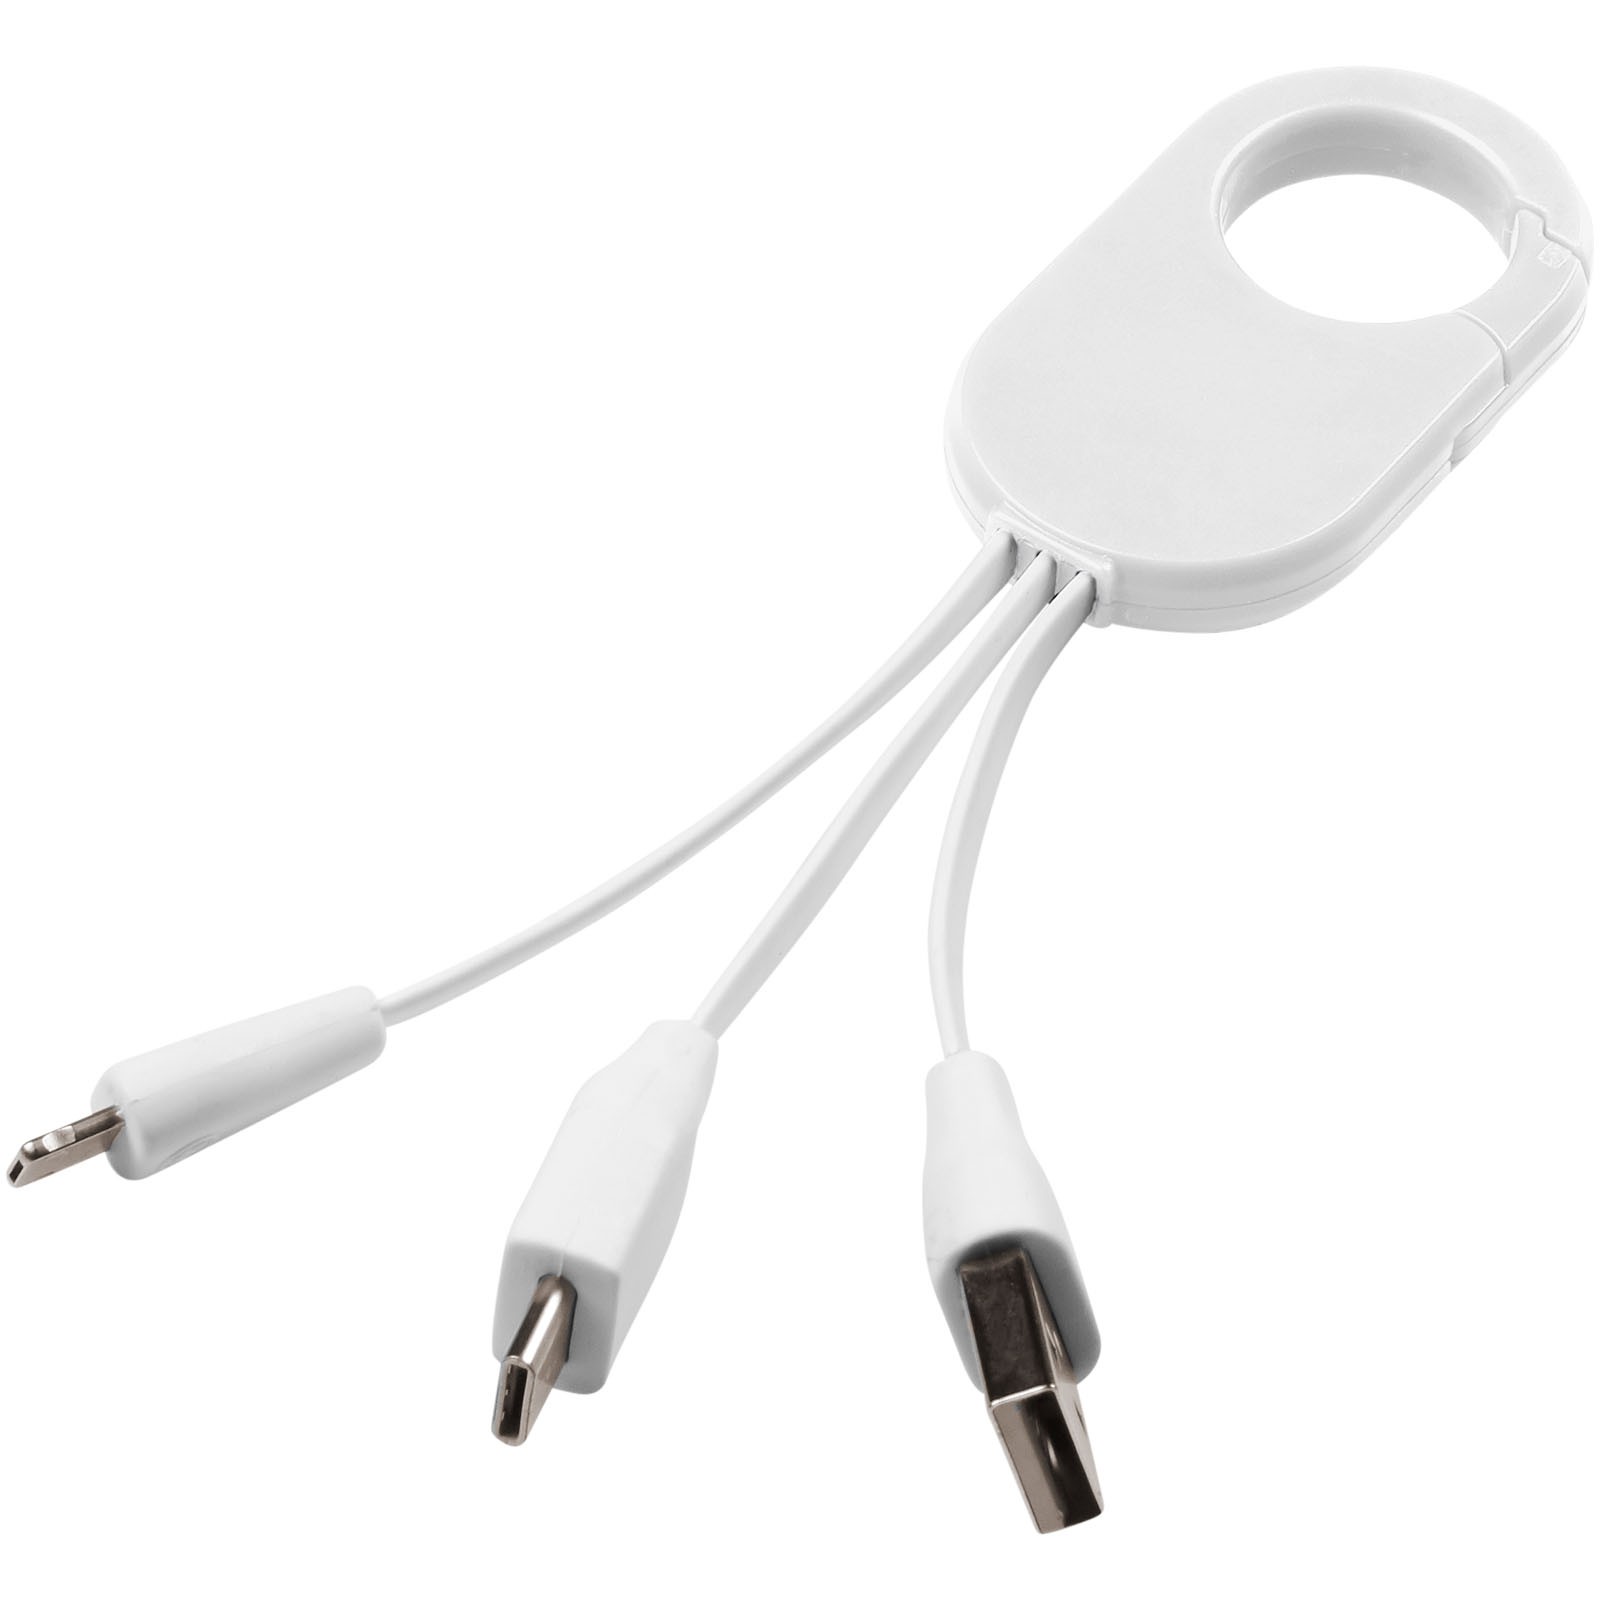 Troop 3-in-1 charging cable - White